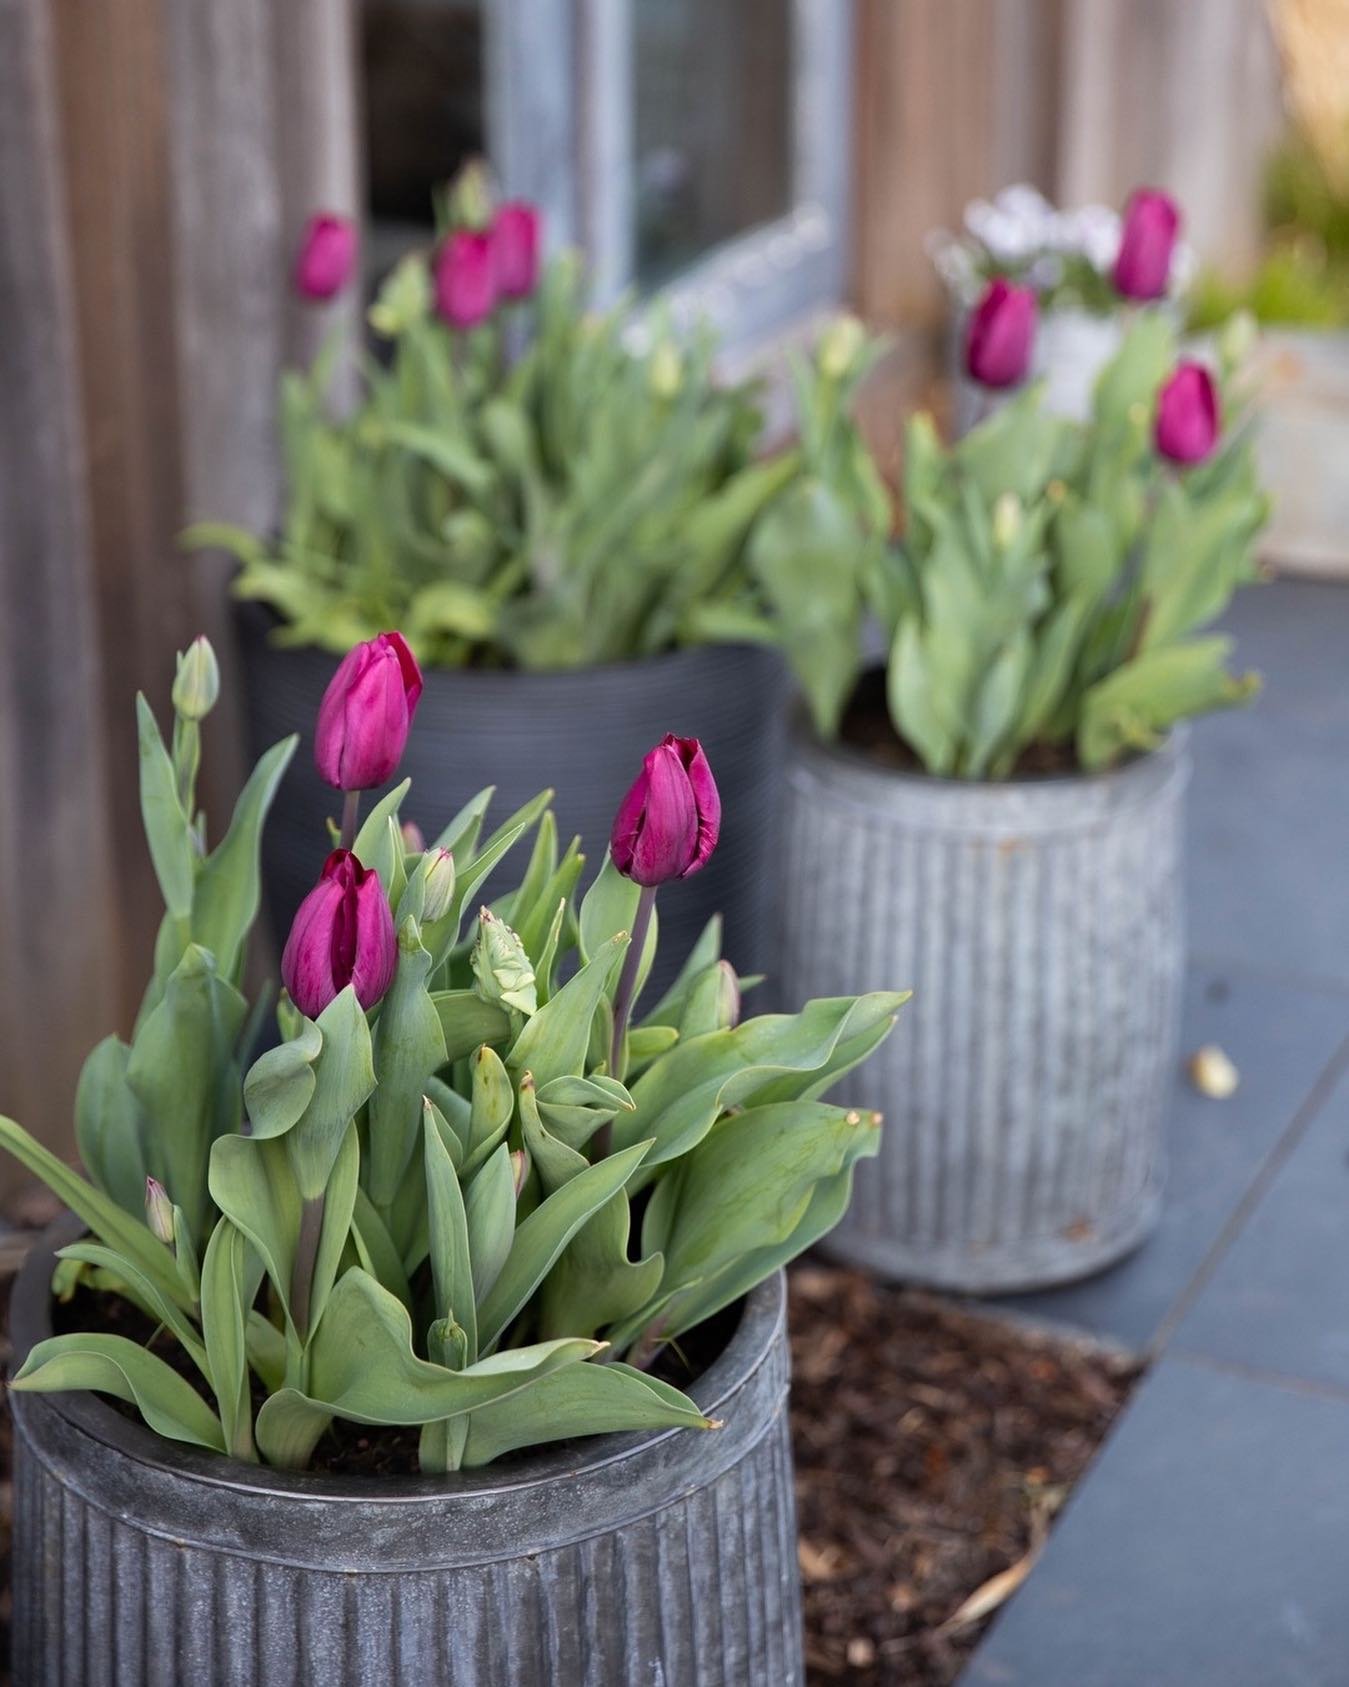 It&rsquo;s one of my very favourite moments of the year when all the tulips come out, and this year is no exception! These are just a few of the gorgeous tulips growing in pots in my parents&rsquo; garden. Growing tulips in pots is a great way of exp